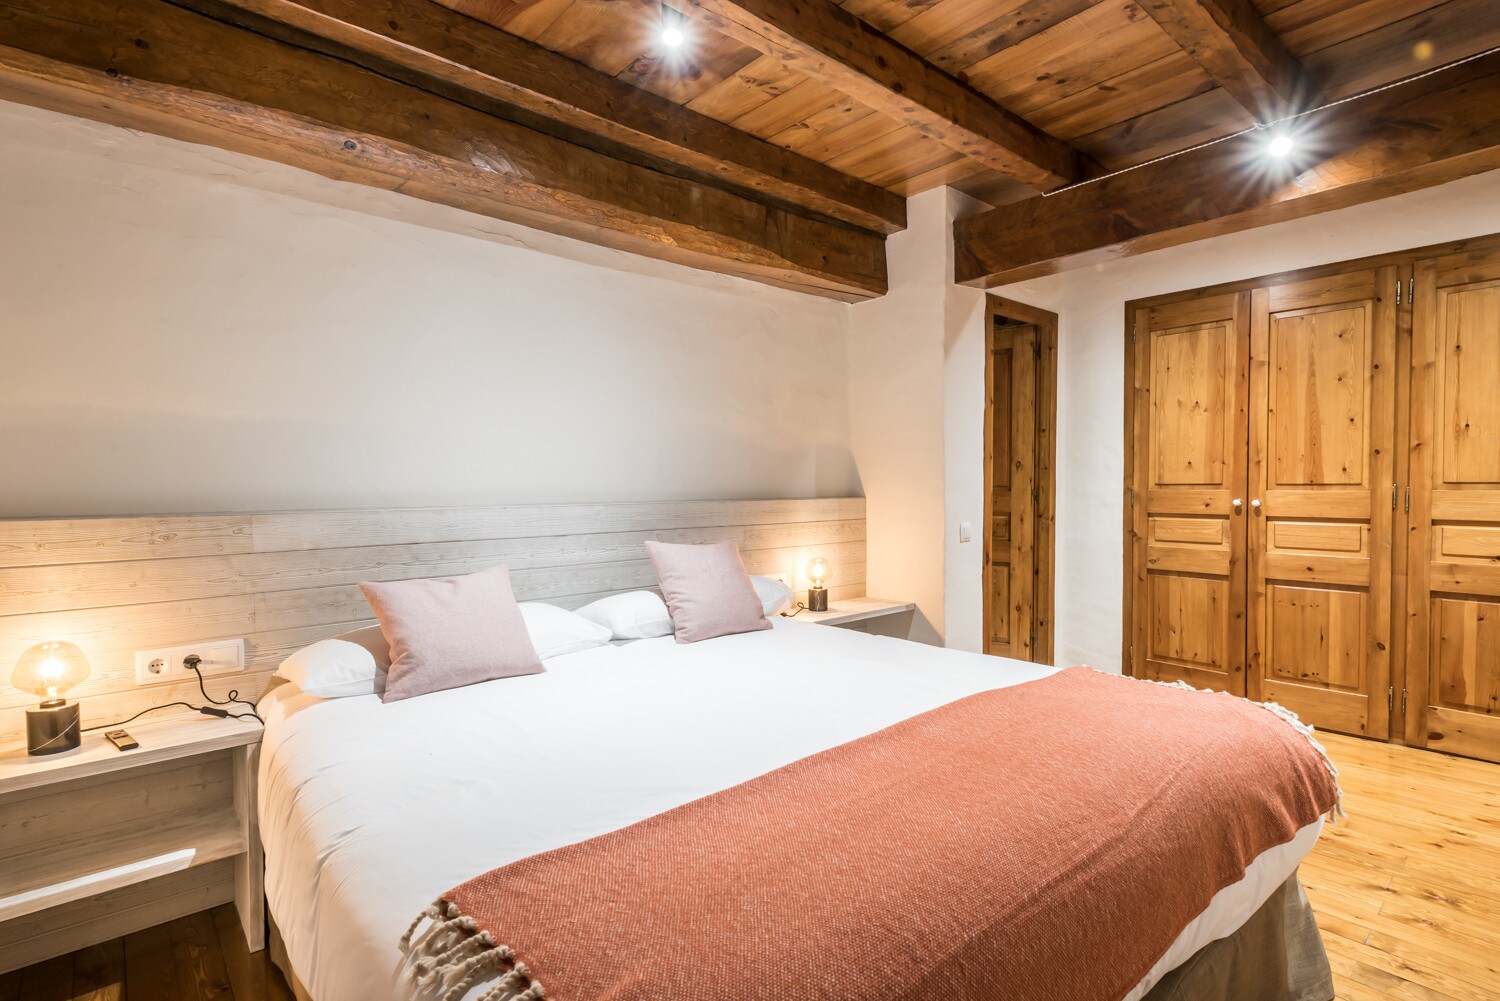 Riu Nere  cozy apartment  3 bedrooms 9 people,in Pleta de Jus at Baqueira ,next to the ski chairlift of Baqueira.